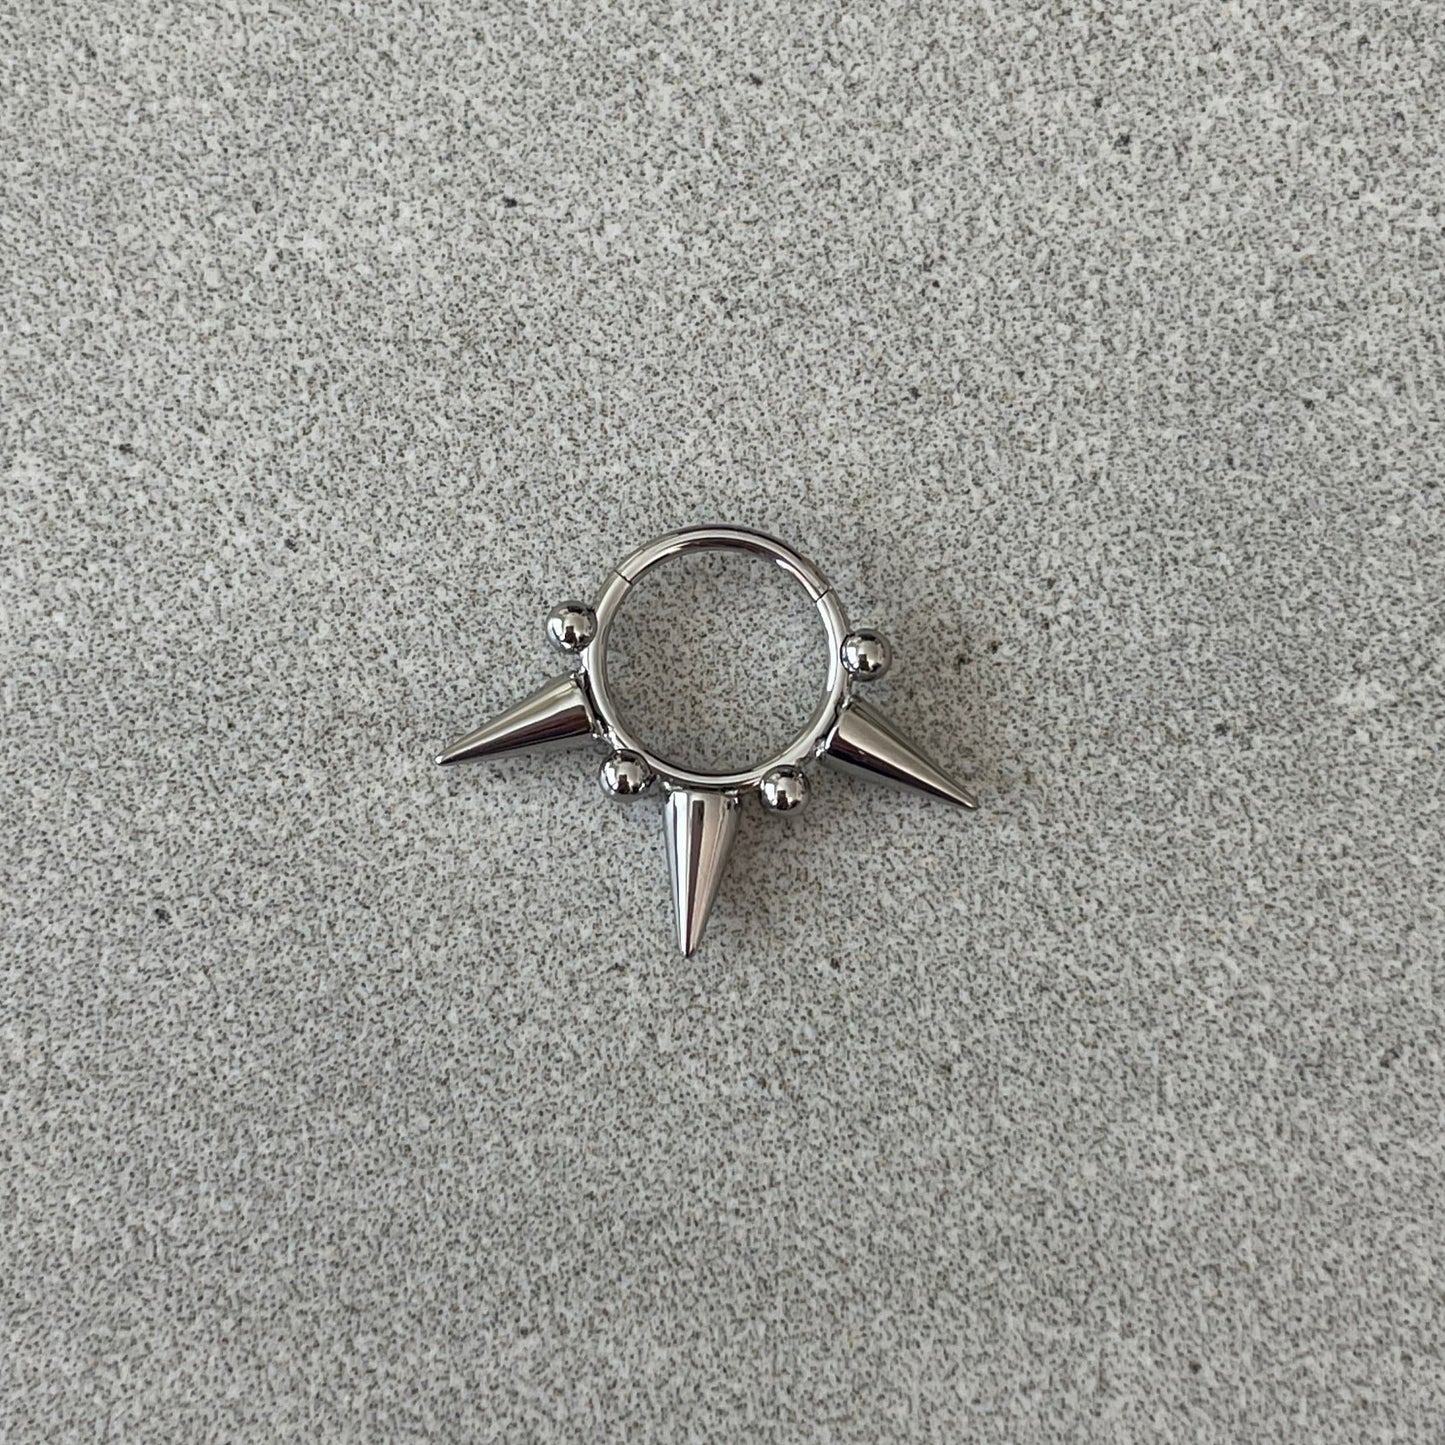 Spike Septum Piercing (16G or 18G | 8mm or 10mm | Surgical Steel | Silver, Black or Gold)